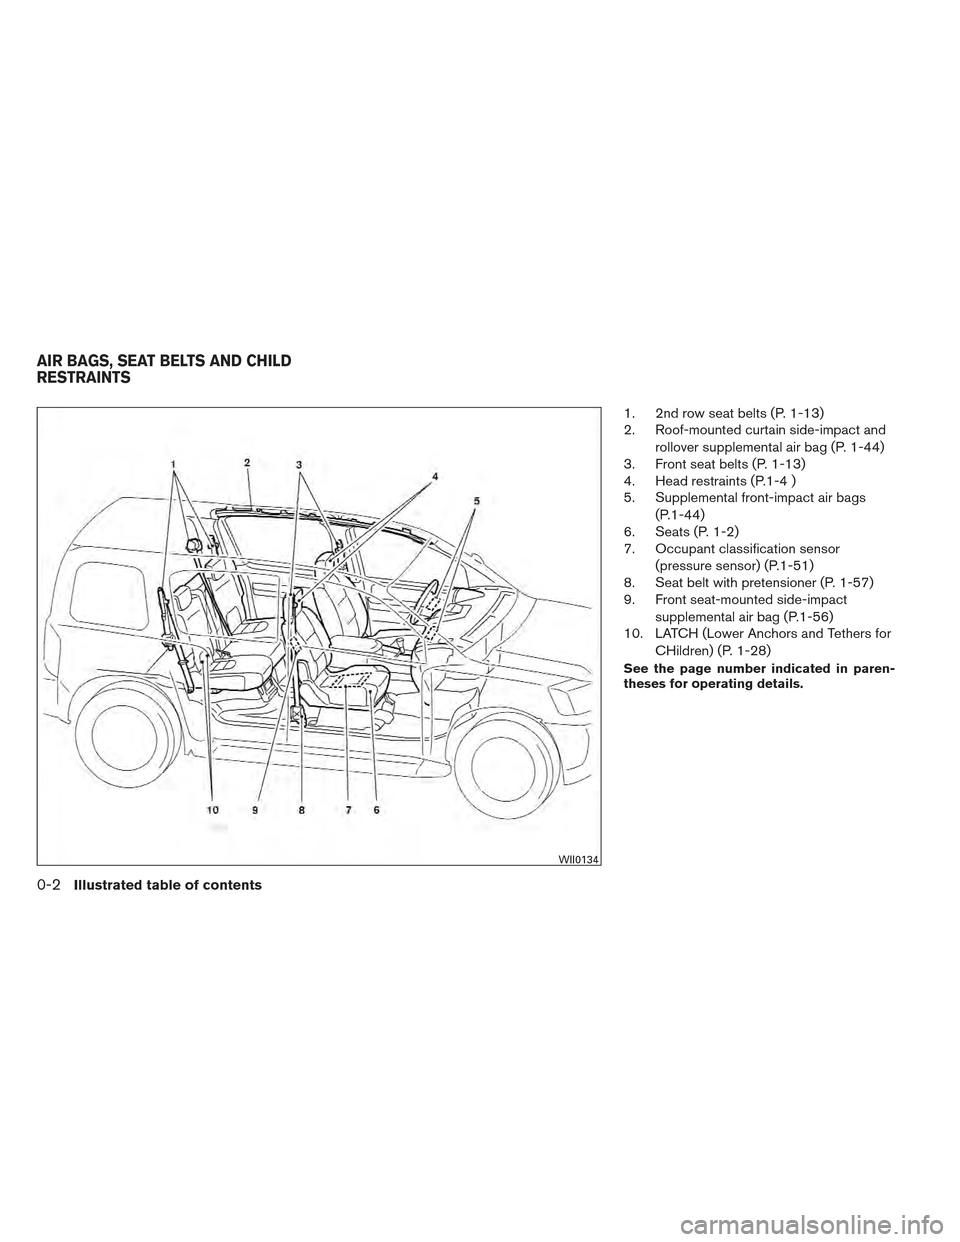 NISSAN XTERRA 2012 N50 / 2.G Owners Manual 1. 2nd row seat belts (P. 1-13)
2. Roof-mounted curtain side-impact androllover supplemental air bag (P. 1-44)
3. Front seat belts (P. 1-13)
4. Head restraints (P.1-4 )
5. Supplemental front-impact ai